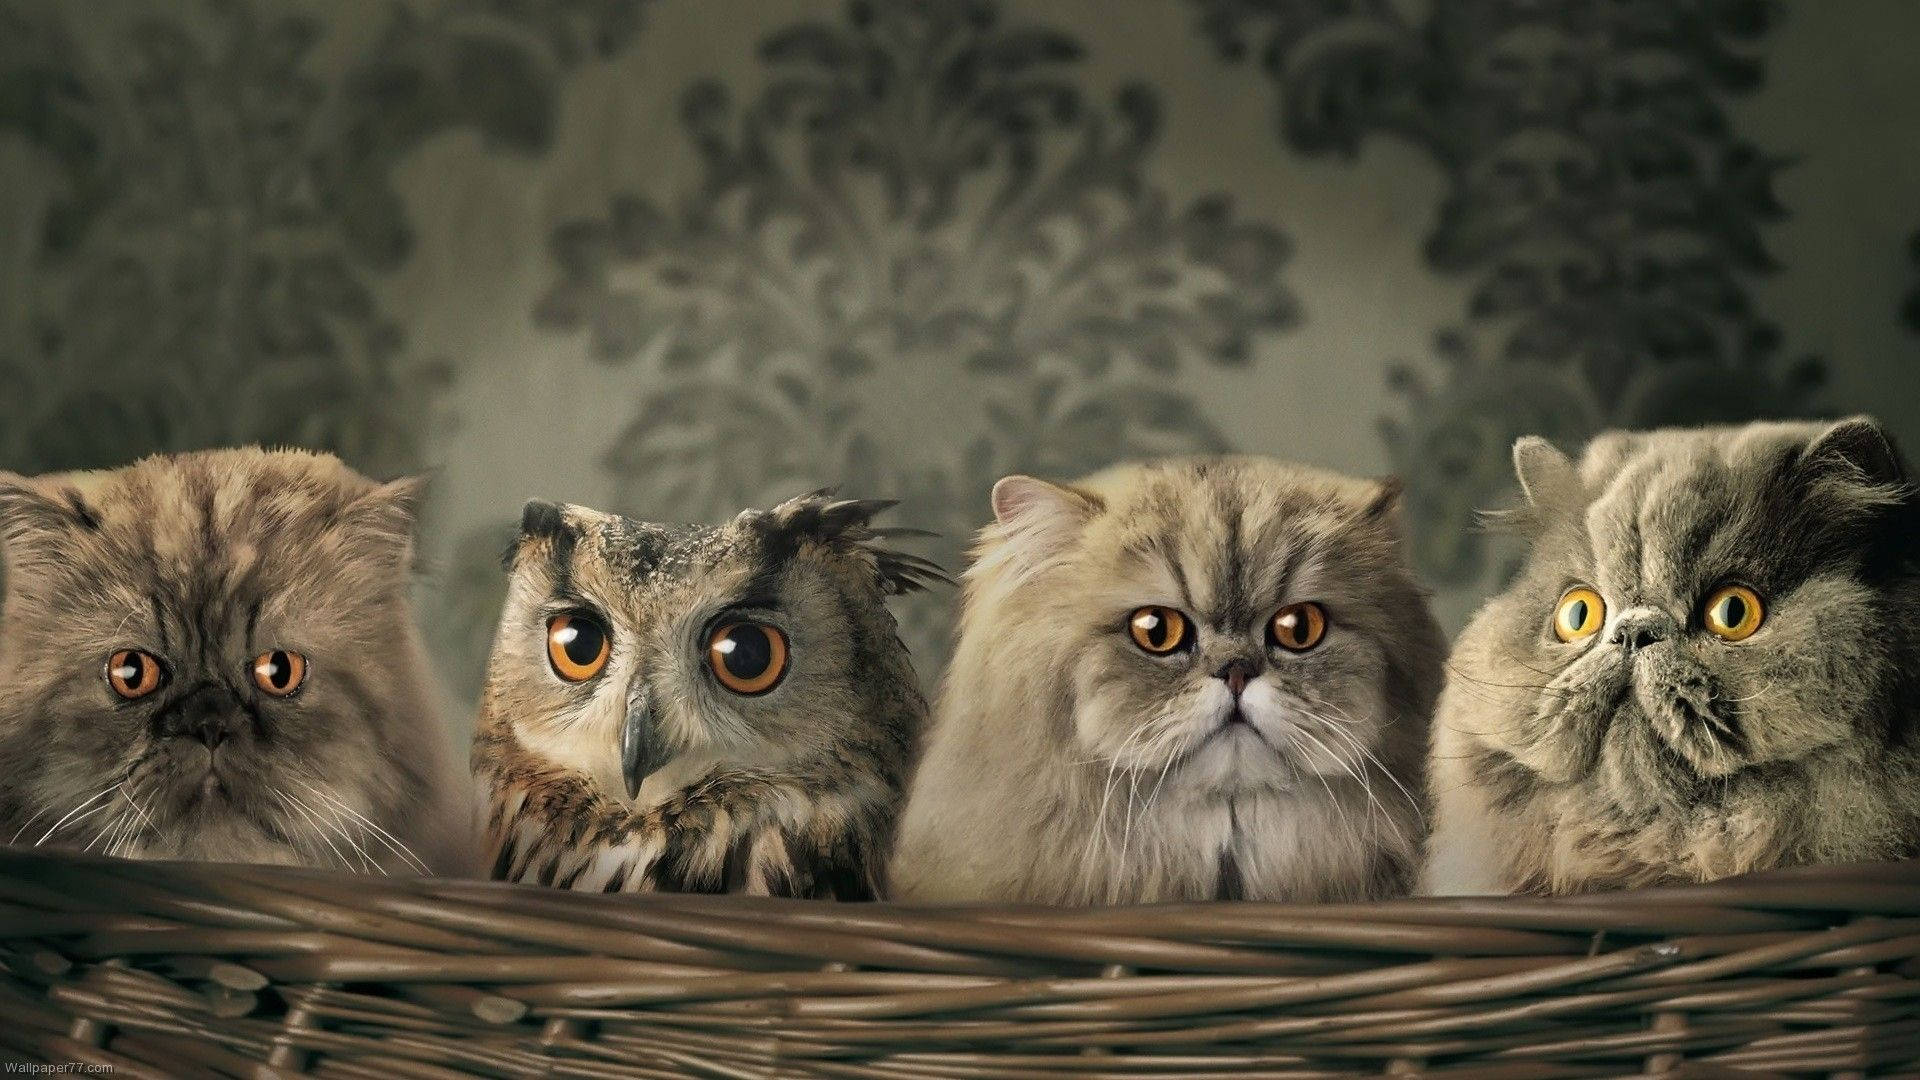 Baby Owl With Cats